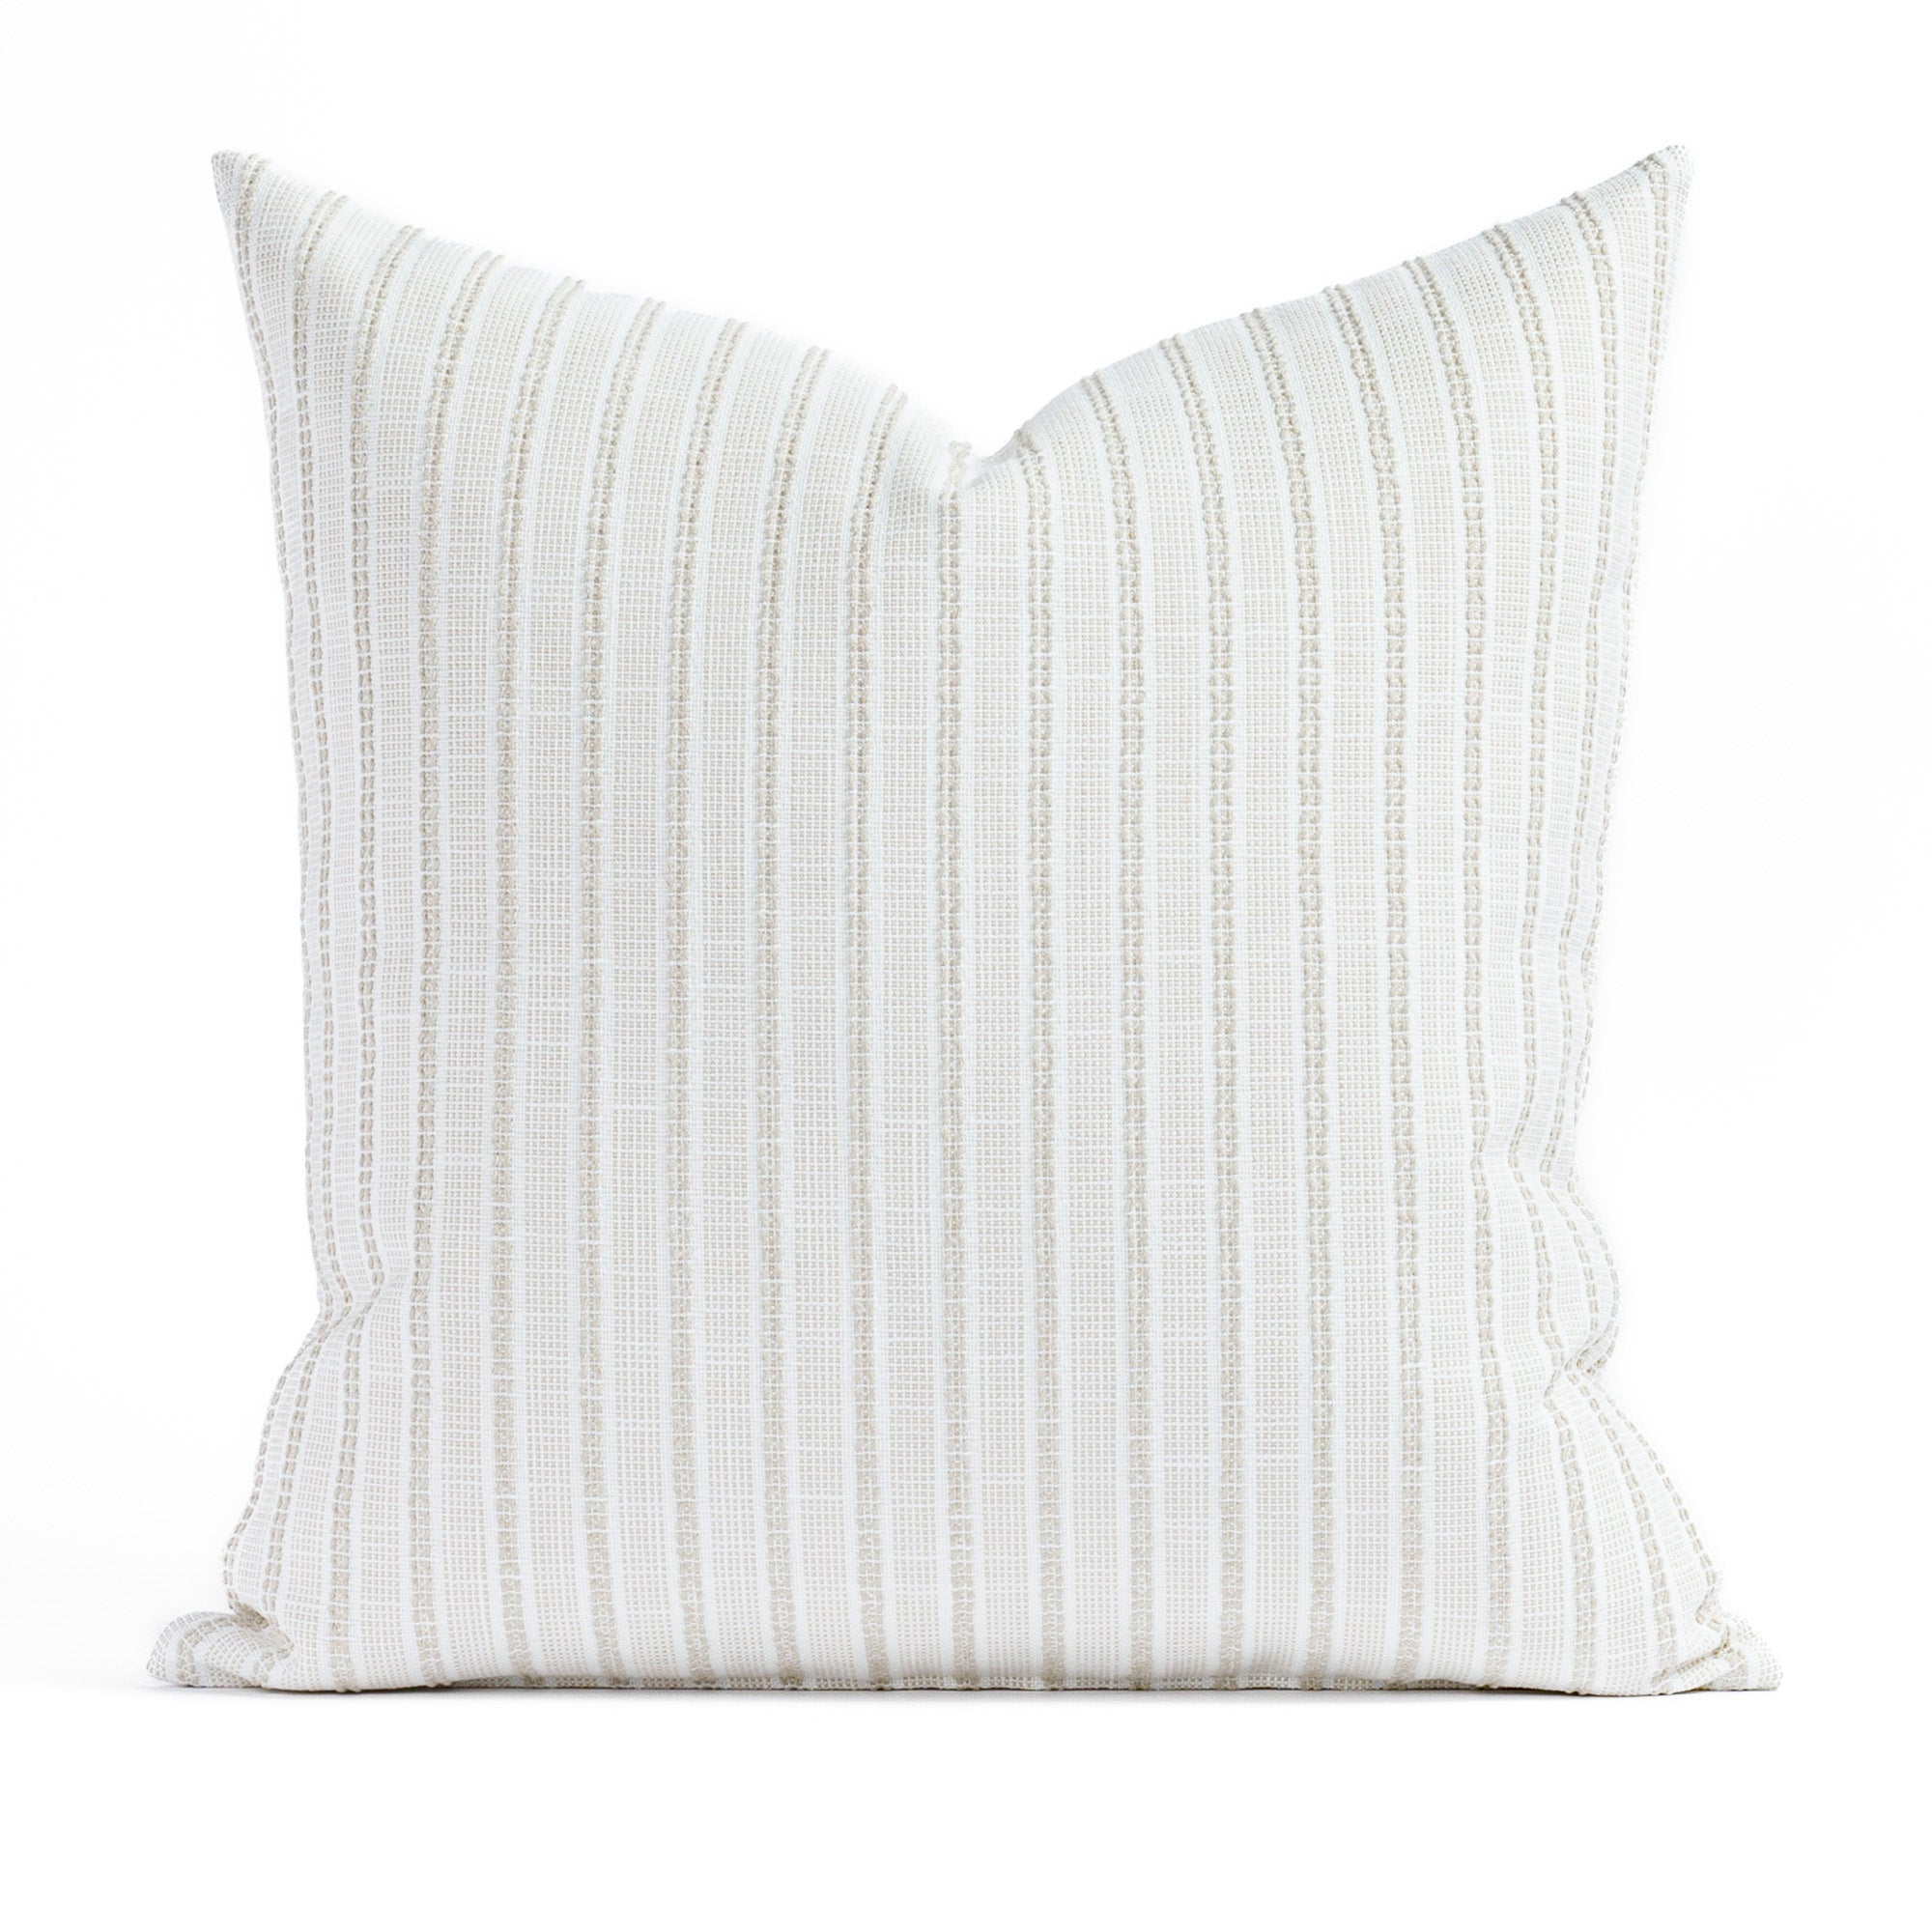 Amalfi Stripe 20x20 Pillow Natural, a white and sand stripe outdoor throw pillow from Tonic Living 